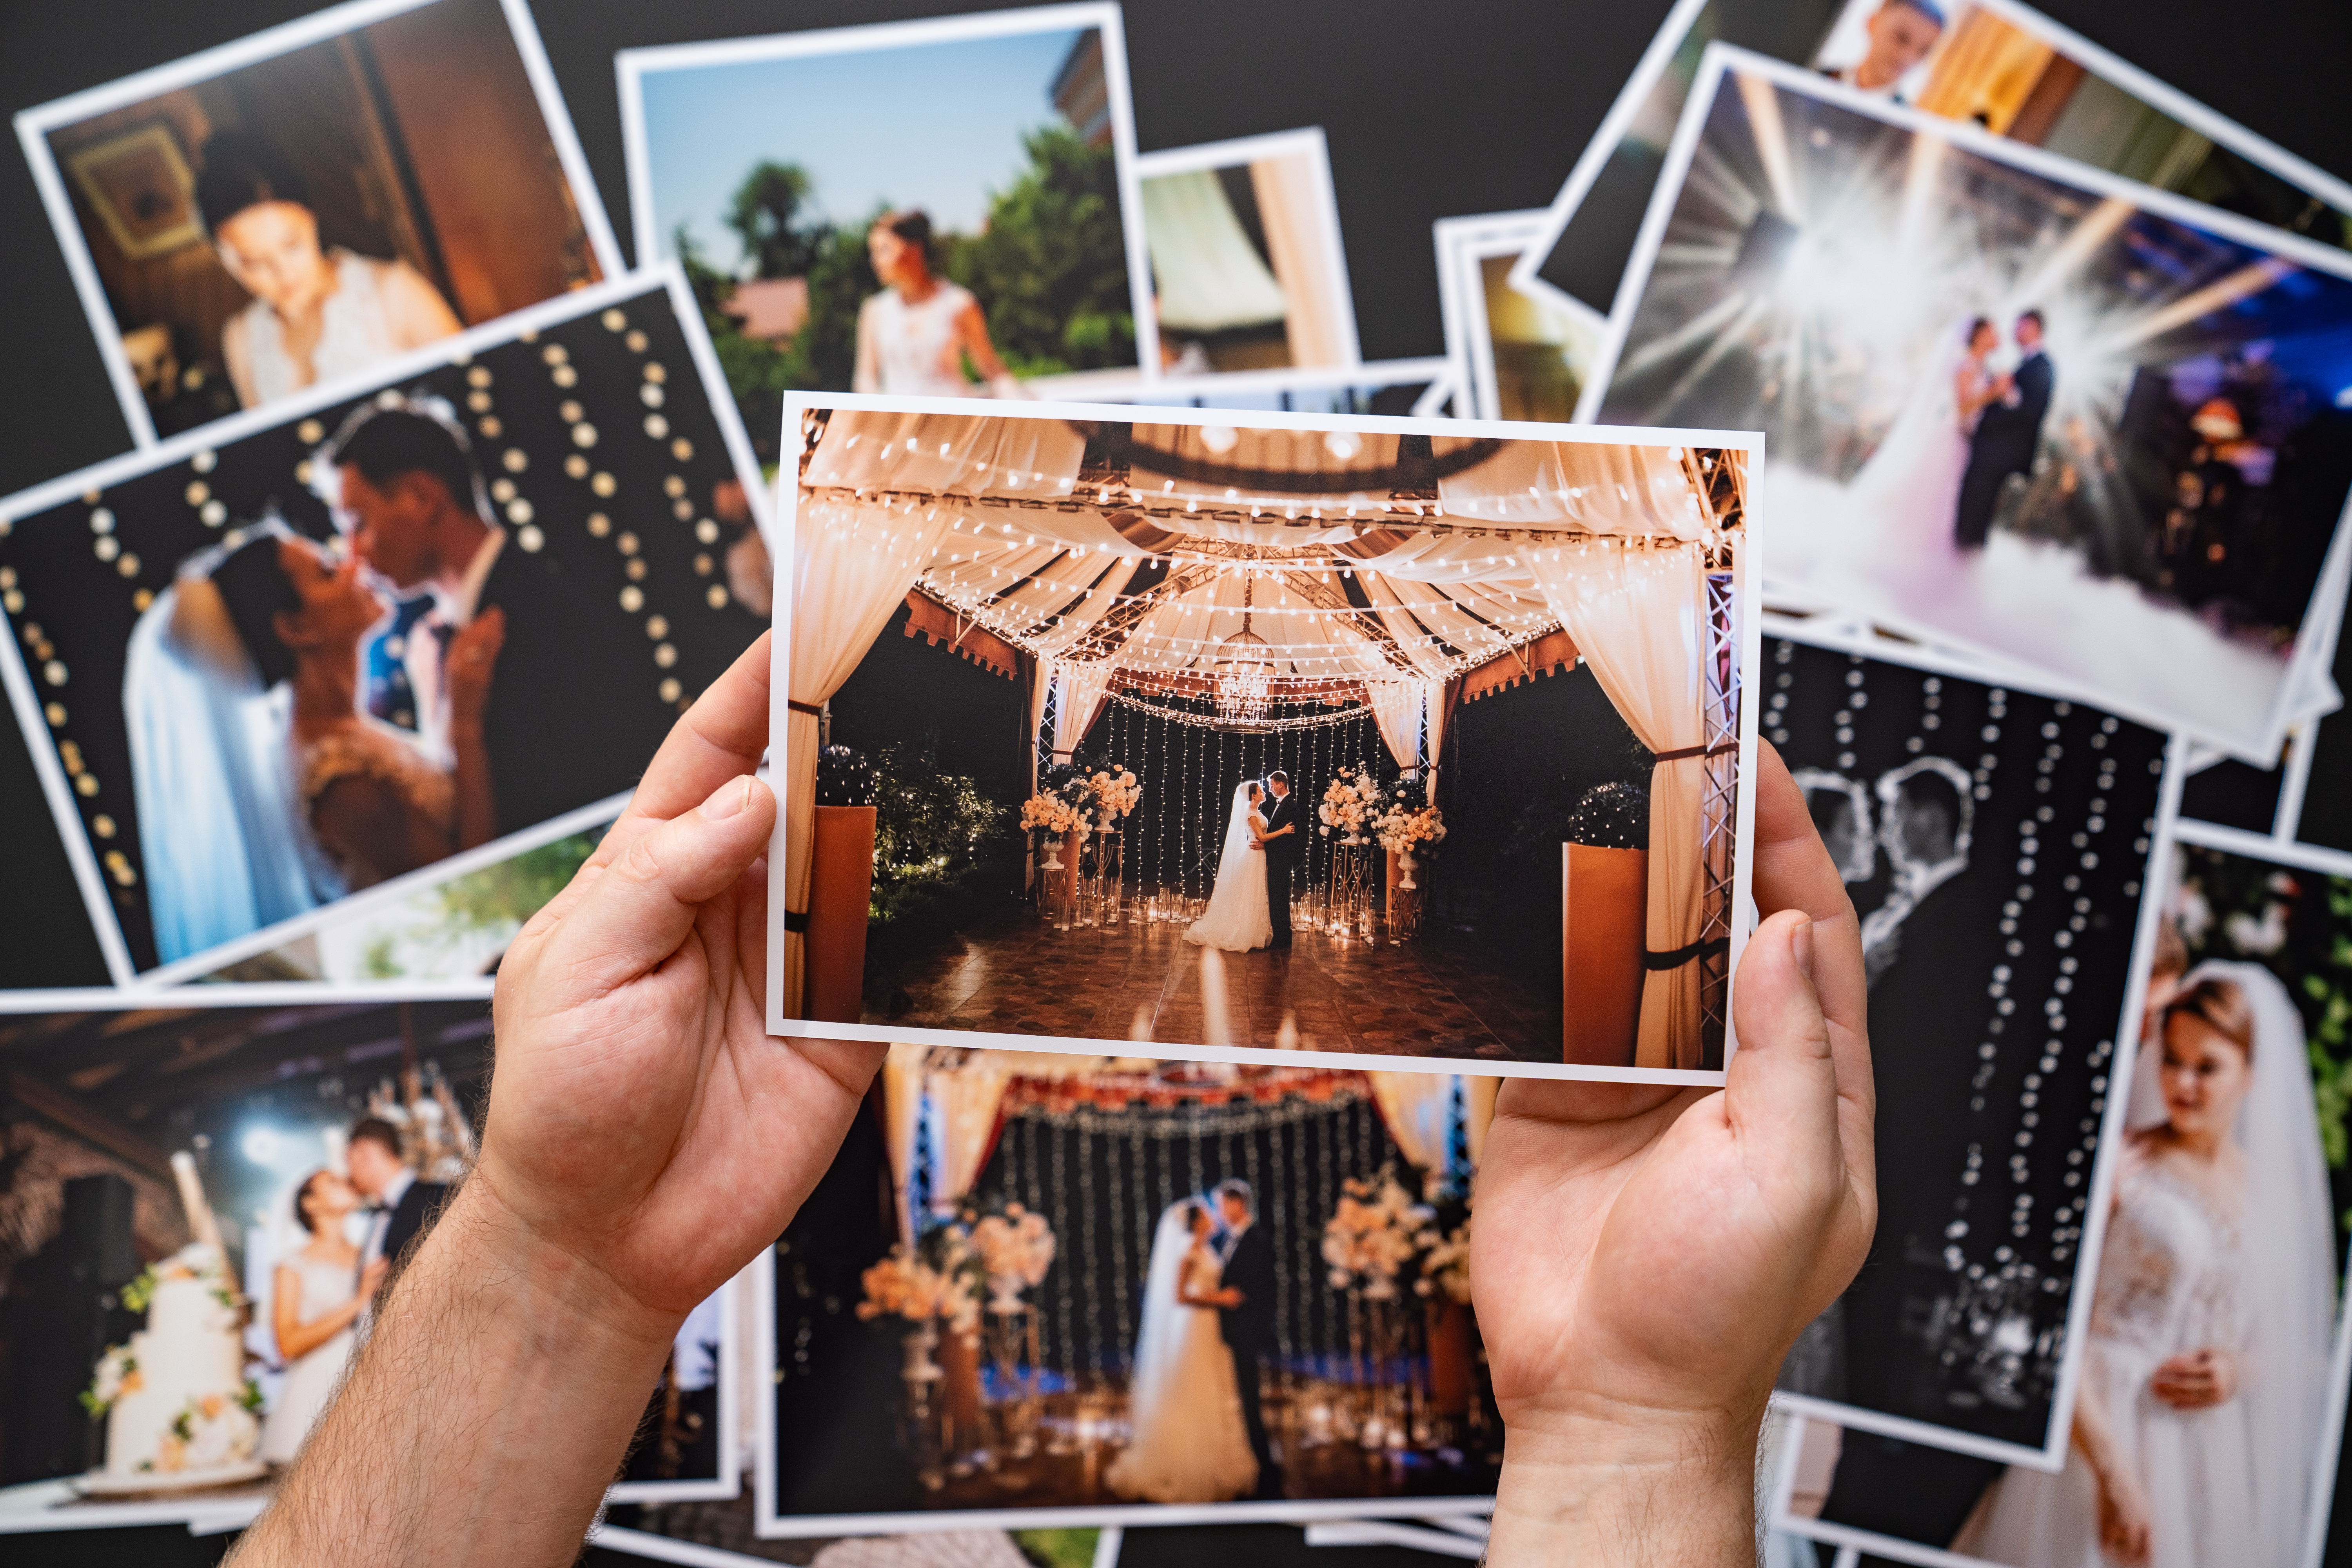 Hands lay out a printed copy of the wedding photos | Source: Shutterstock